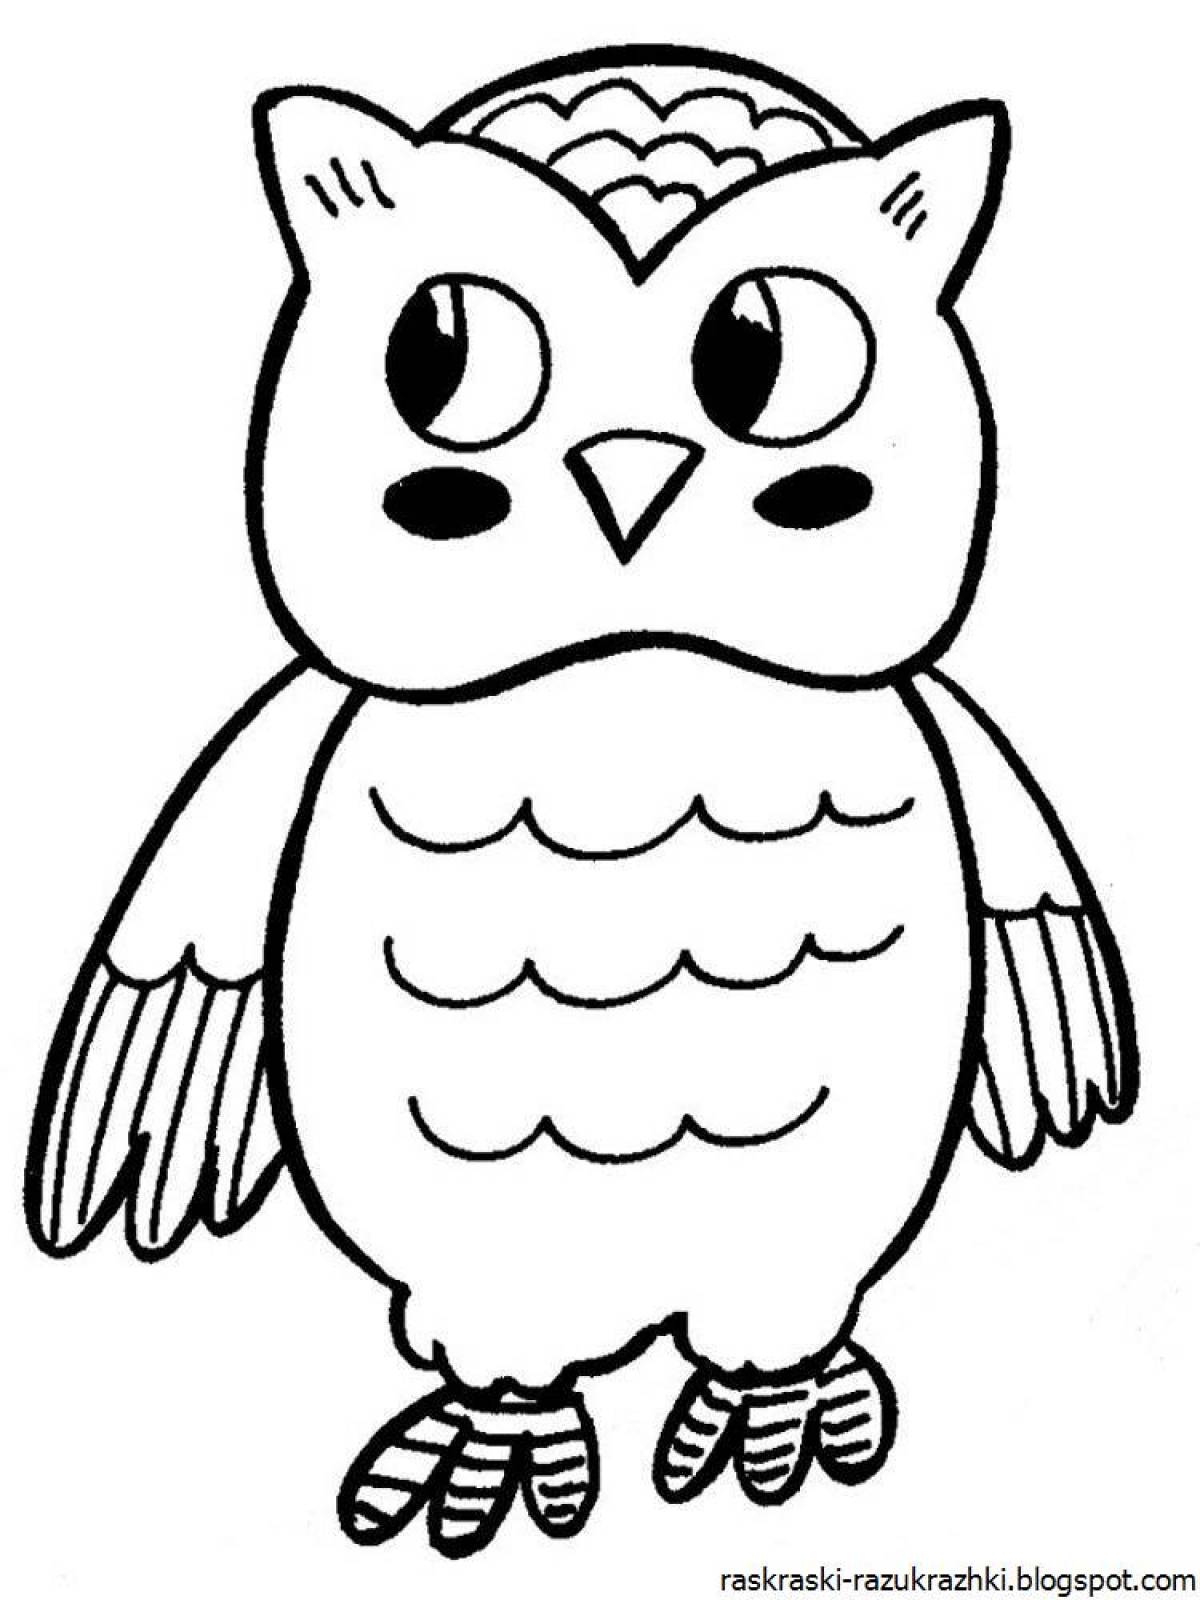 Crazy owl coloring book for kids